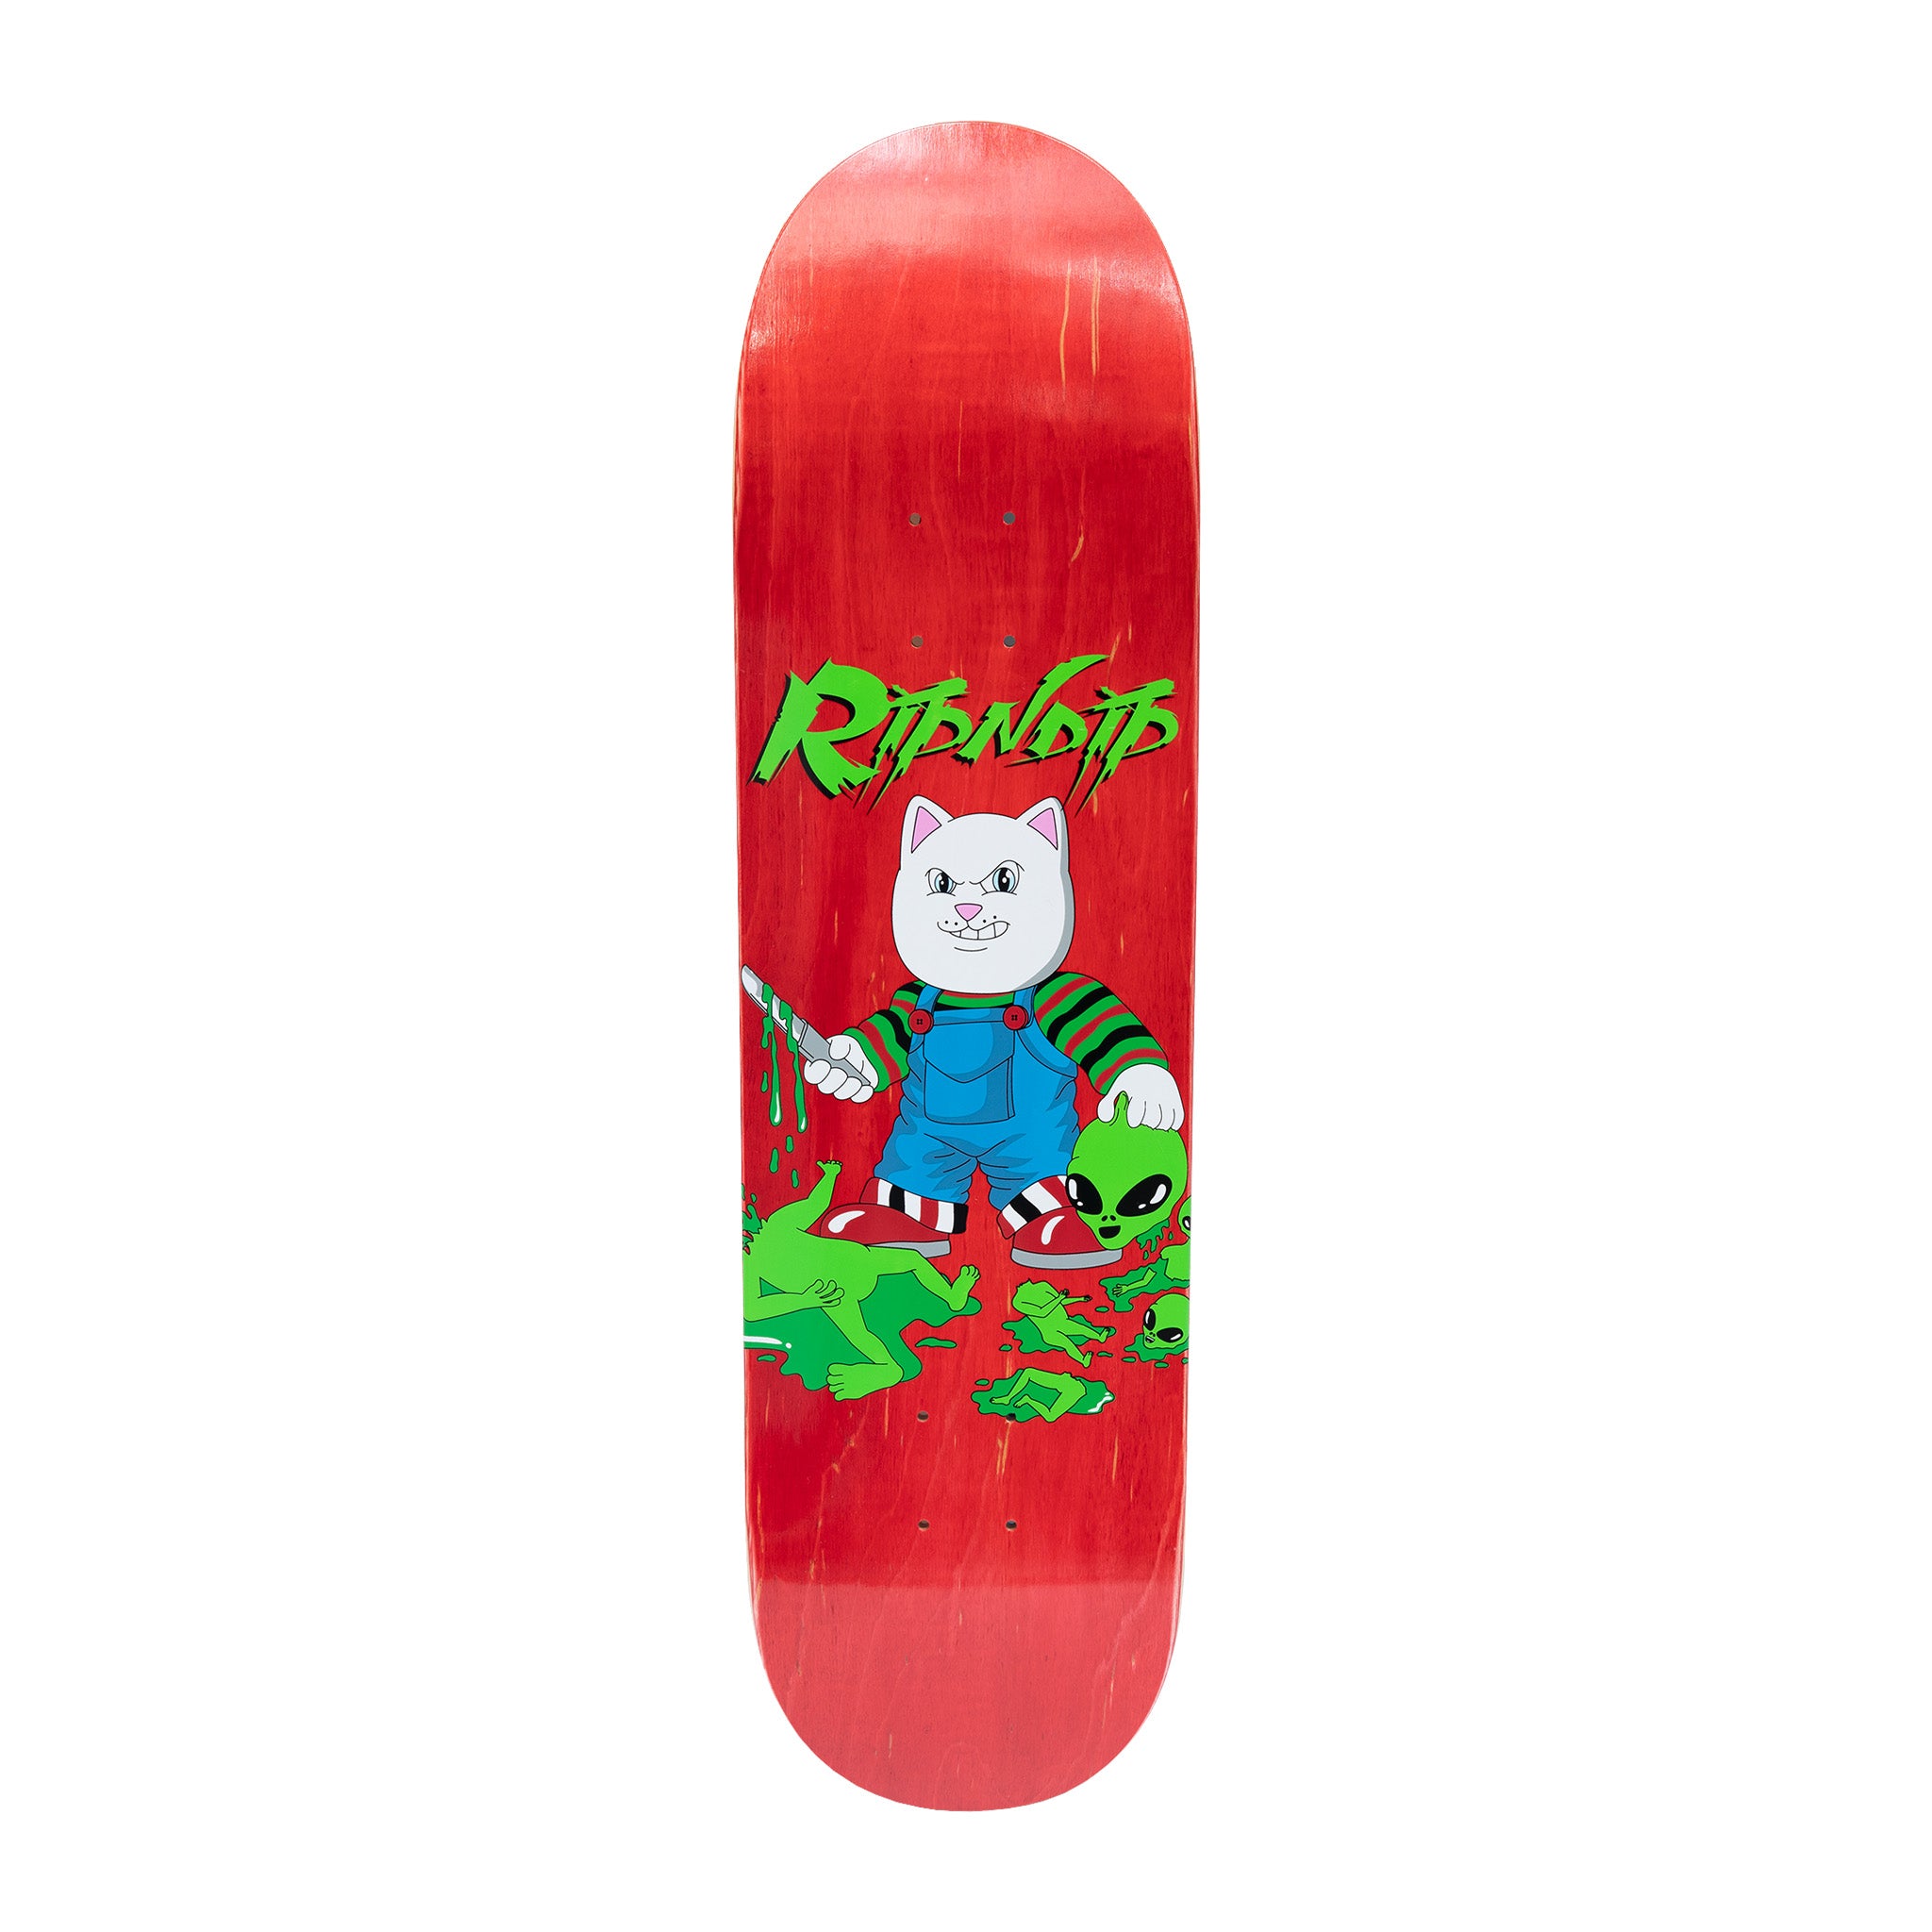 Childs Play Board (Red)